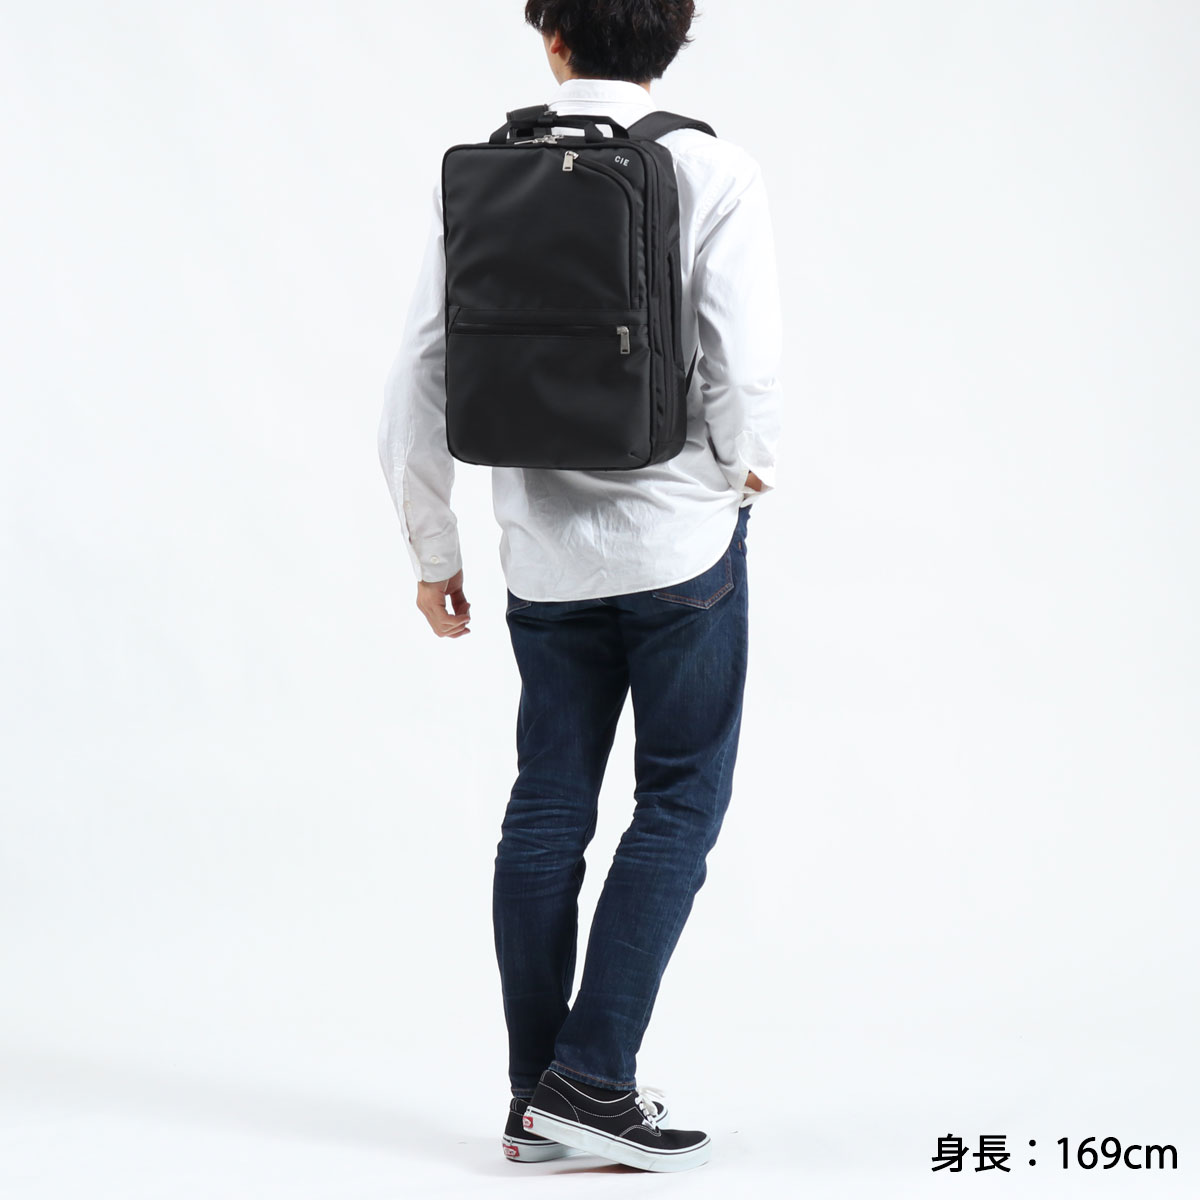 CIE シー VARIOUS 2WAY BACKPACK バックパック 021804｜【正規販売店